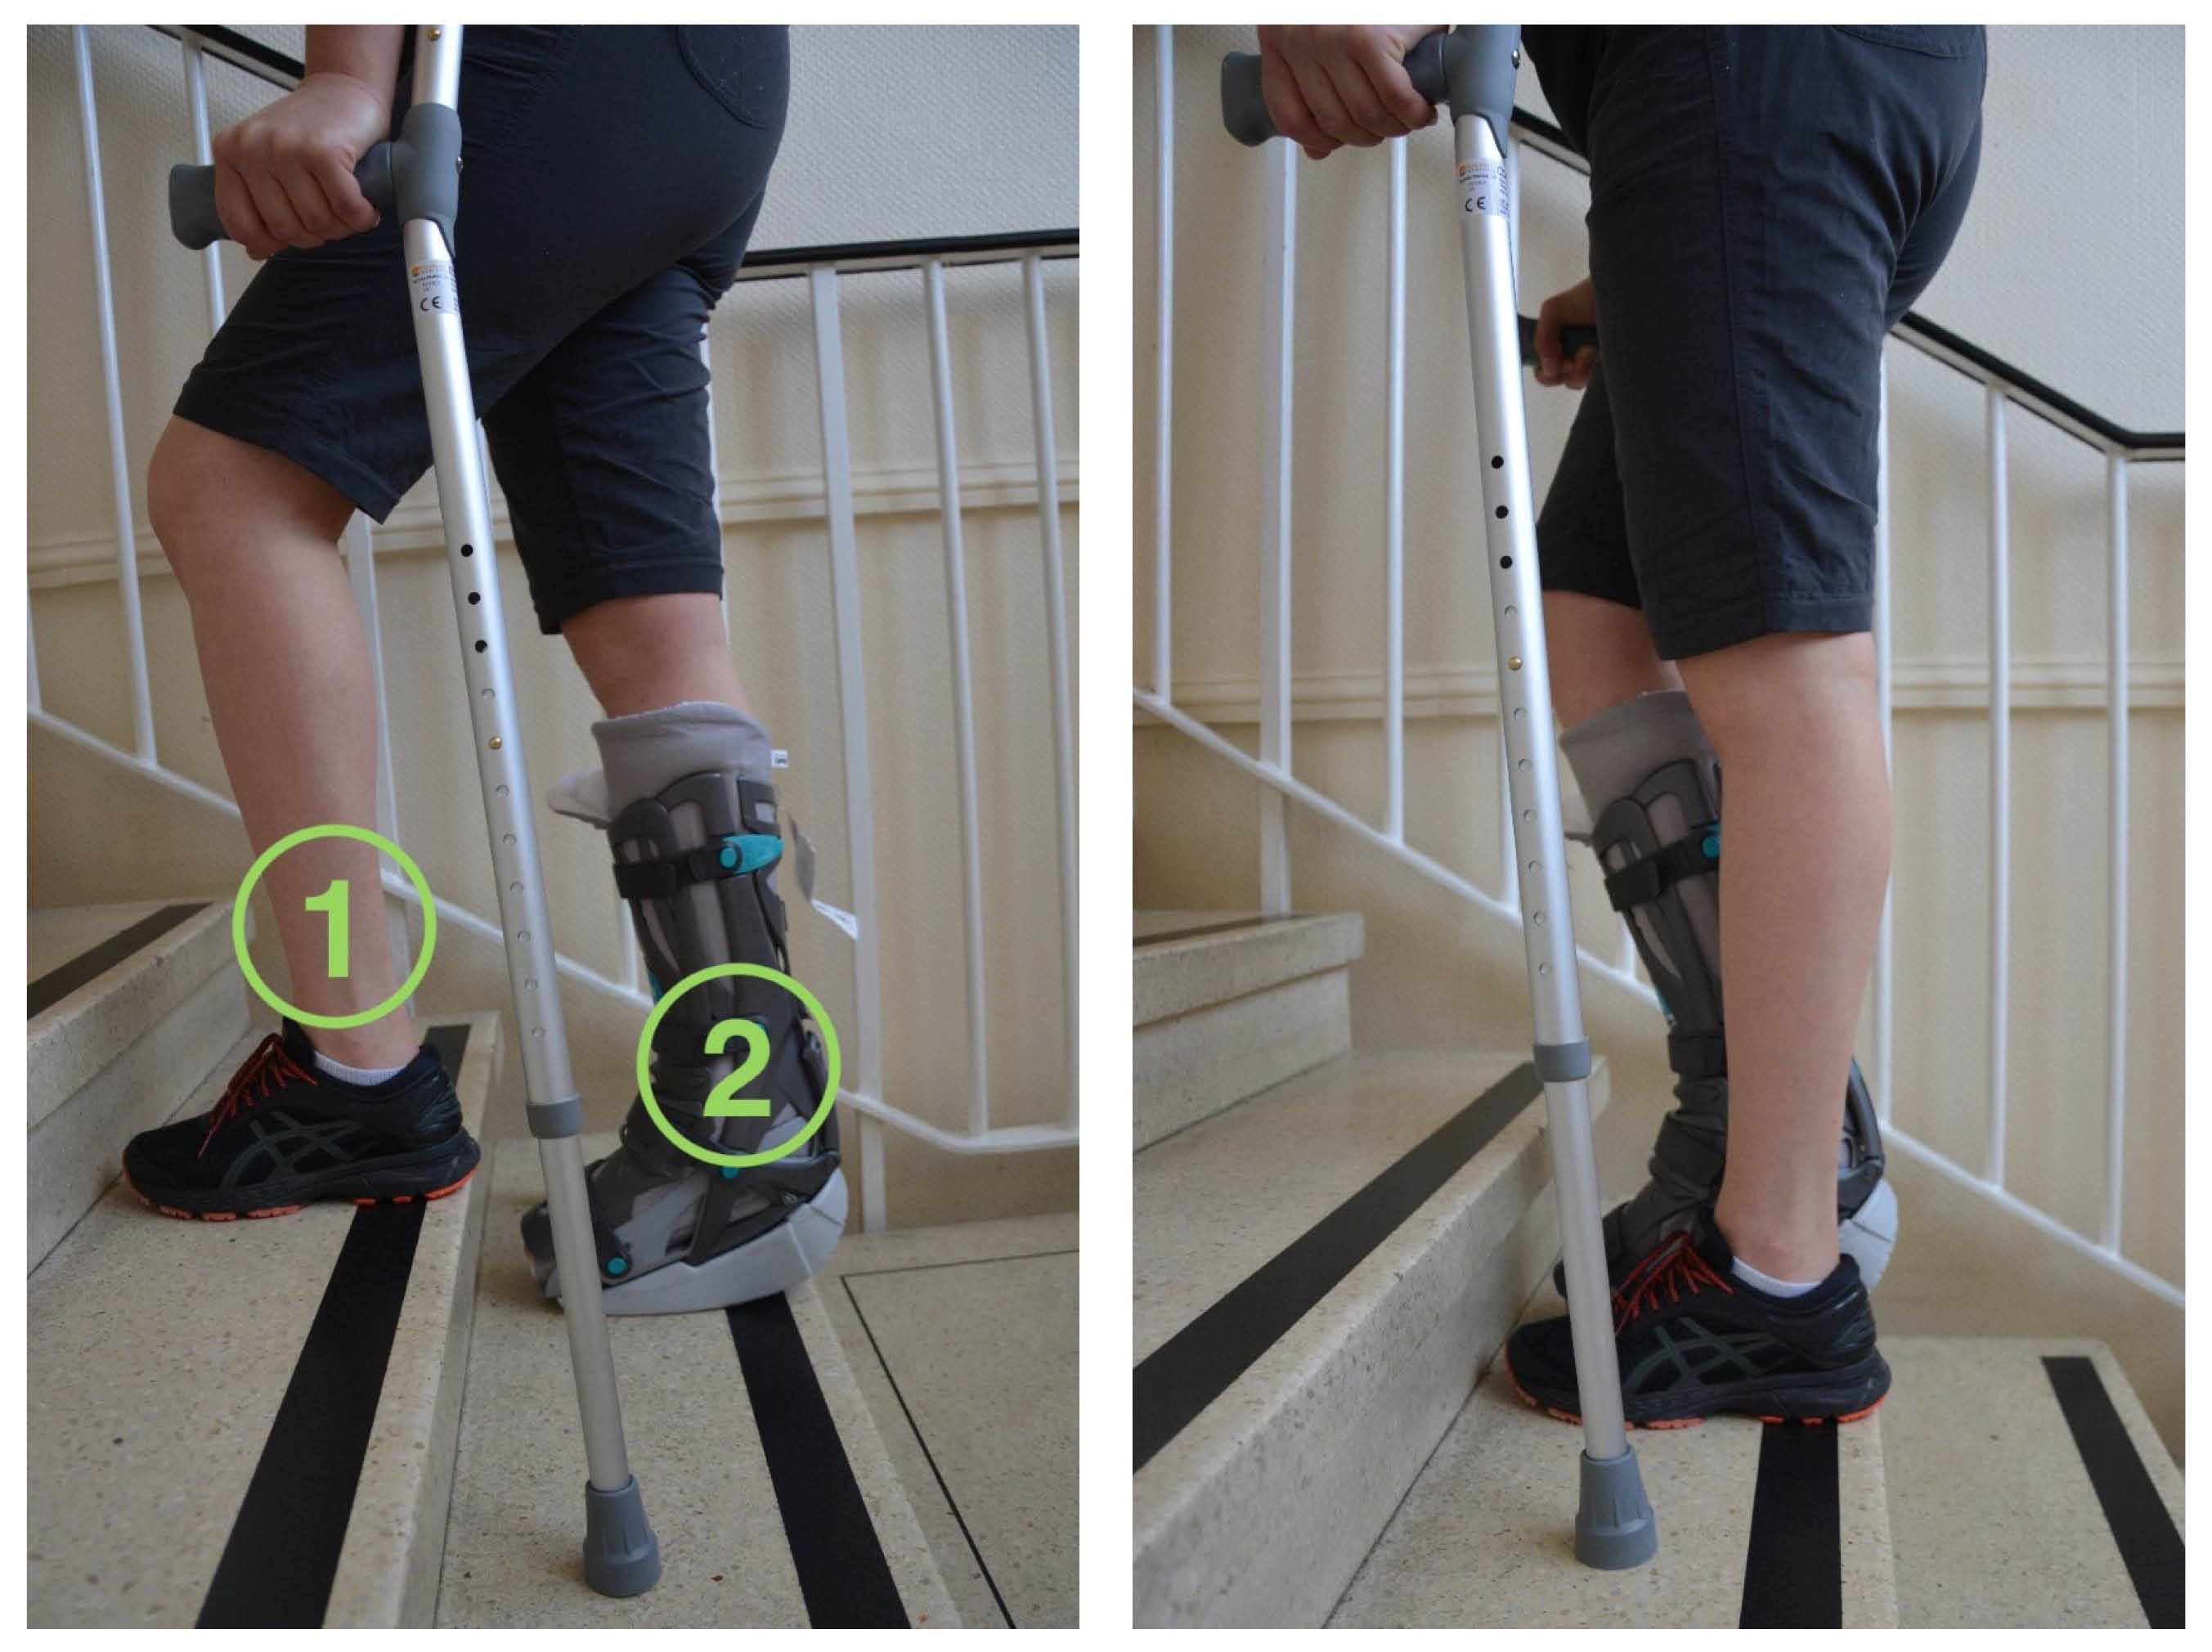 When going up the stairs, start with your non-affected leg first (1), follow with the affected leg (2) and then the crutches.